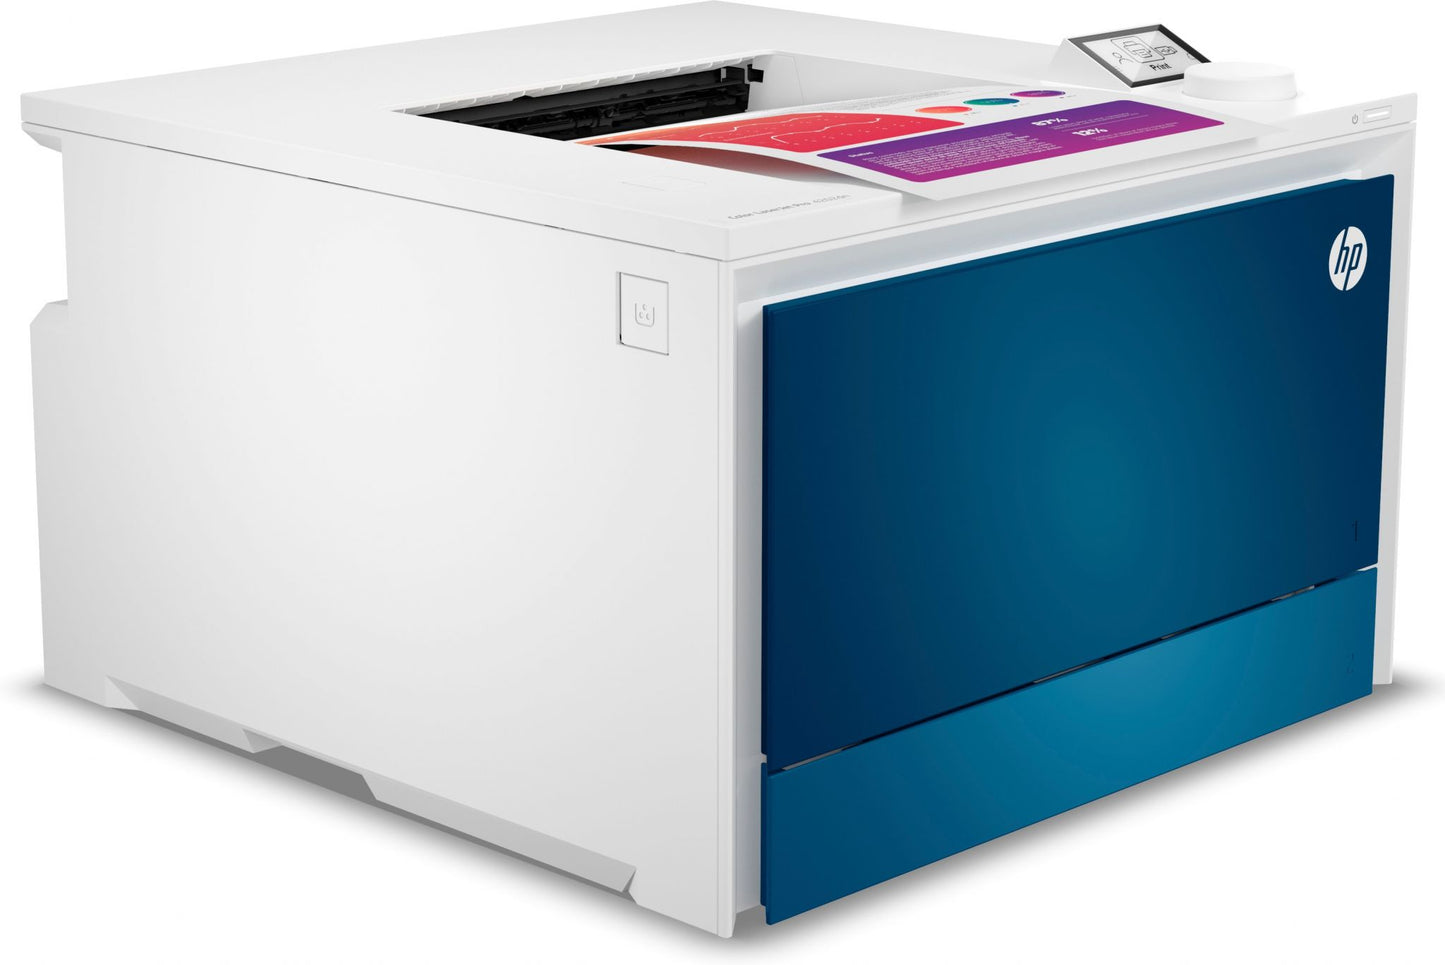 HP Color LaserJet Pro 4202dn Printer, Color, Printer for Small medium business, Print, Print from phone or tablet; Two-sided printing; Optional high-capacity trays